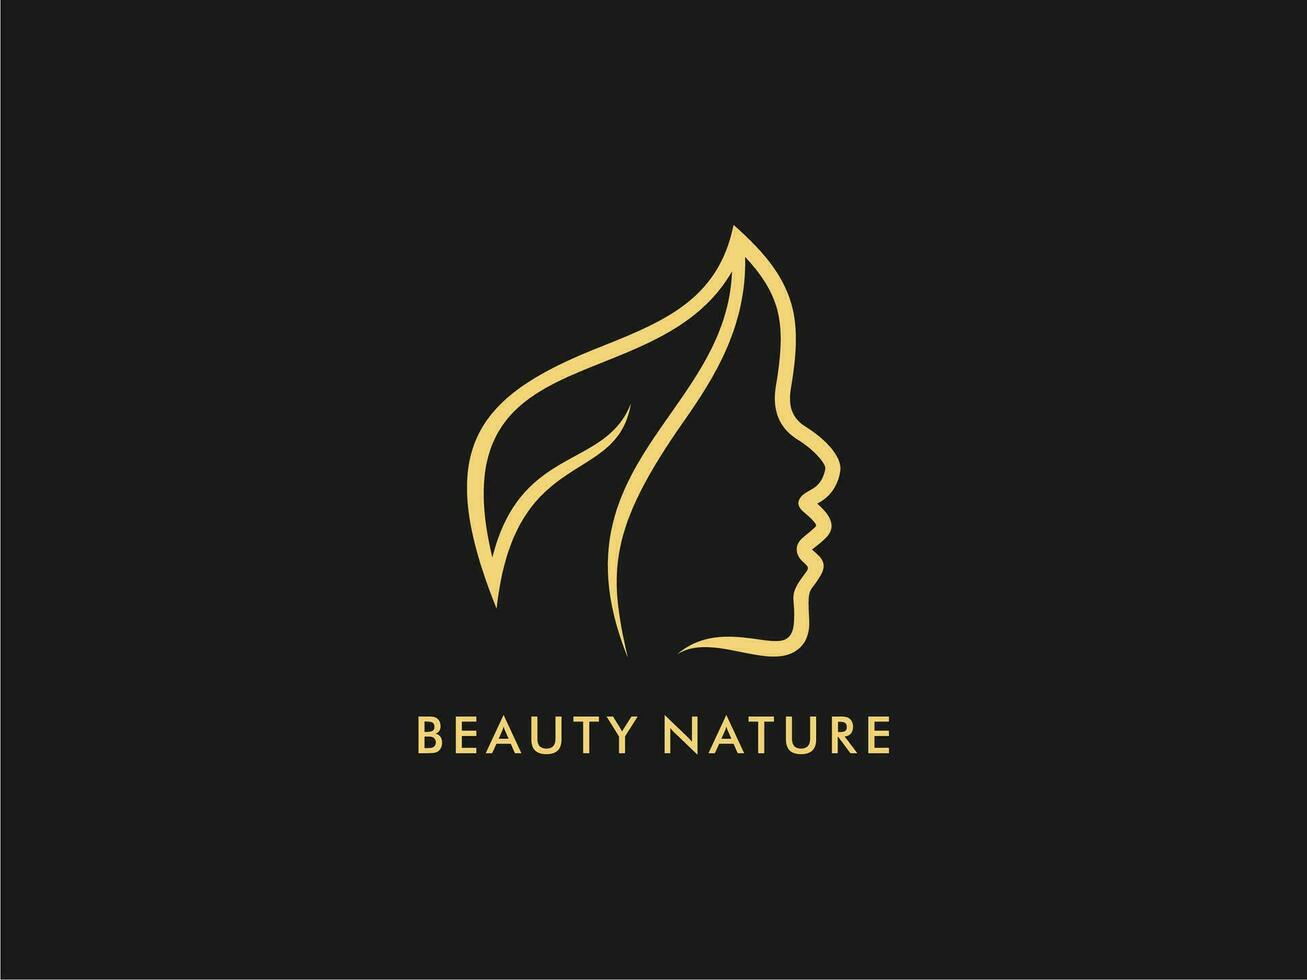 Beautiful woman's face with leaf logo design template. Creative premium symbol for beauty salon, massage, magazine, cosmetic and spa. vector